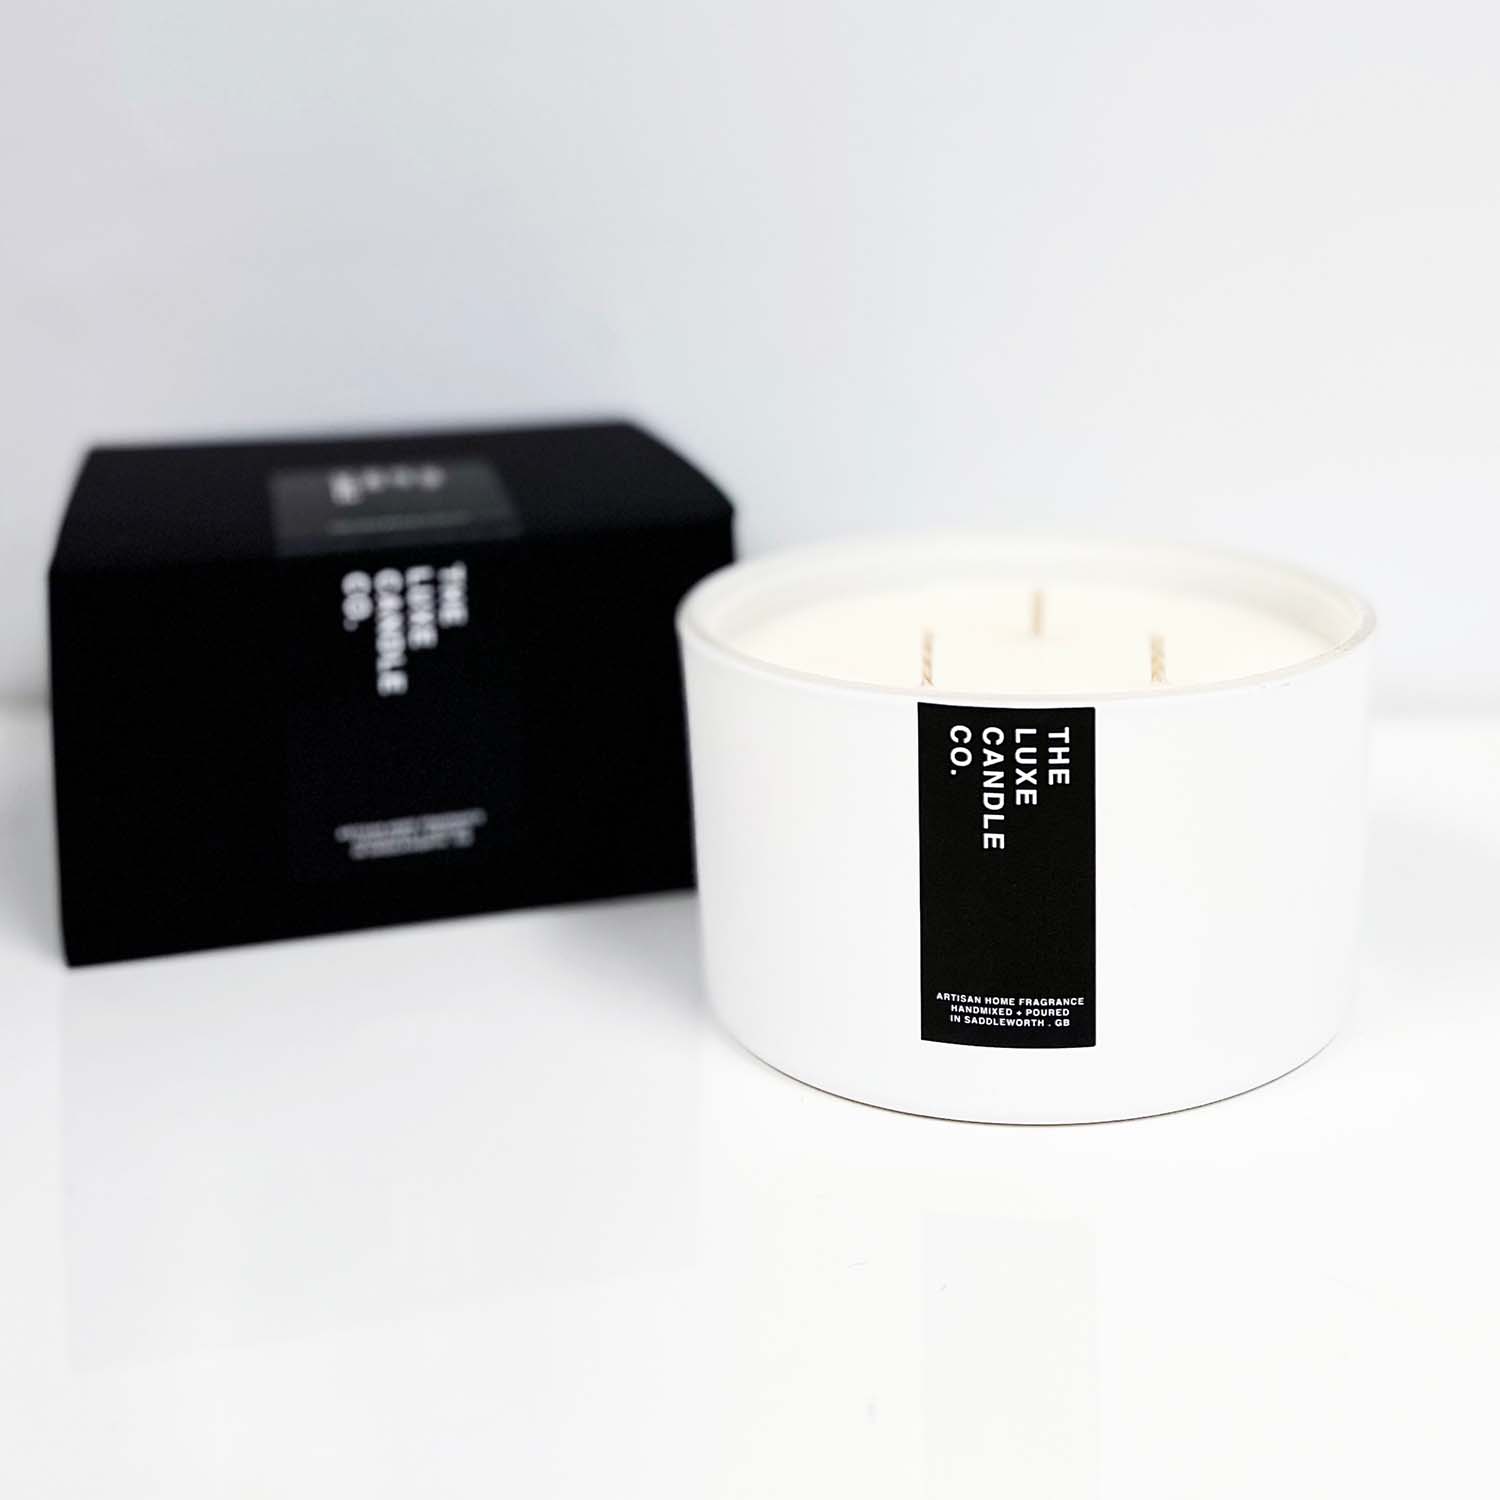 Multiwick large candles - white 3 wick scented by The Luxe Candle Cocandle